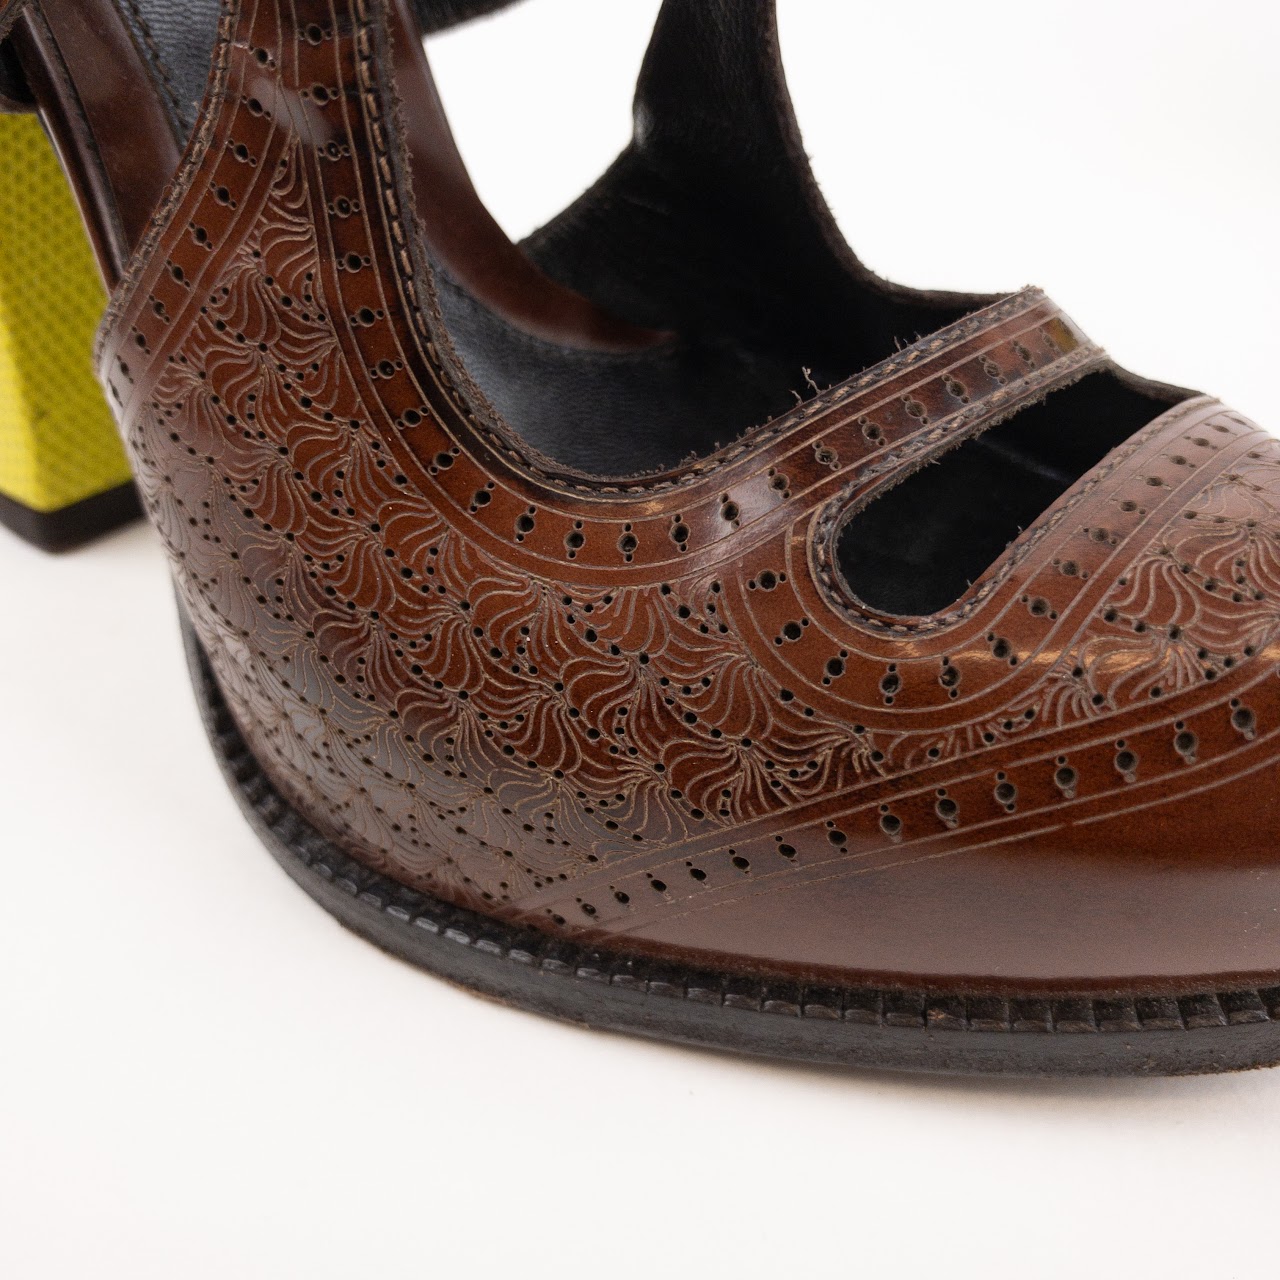 Fendi Brown and Yellow Leather Brogue Pumps